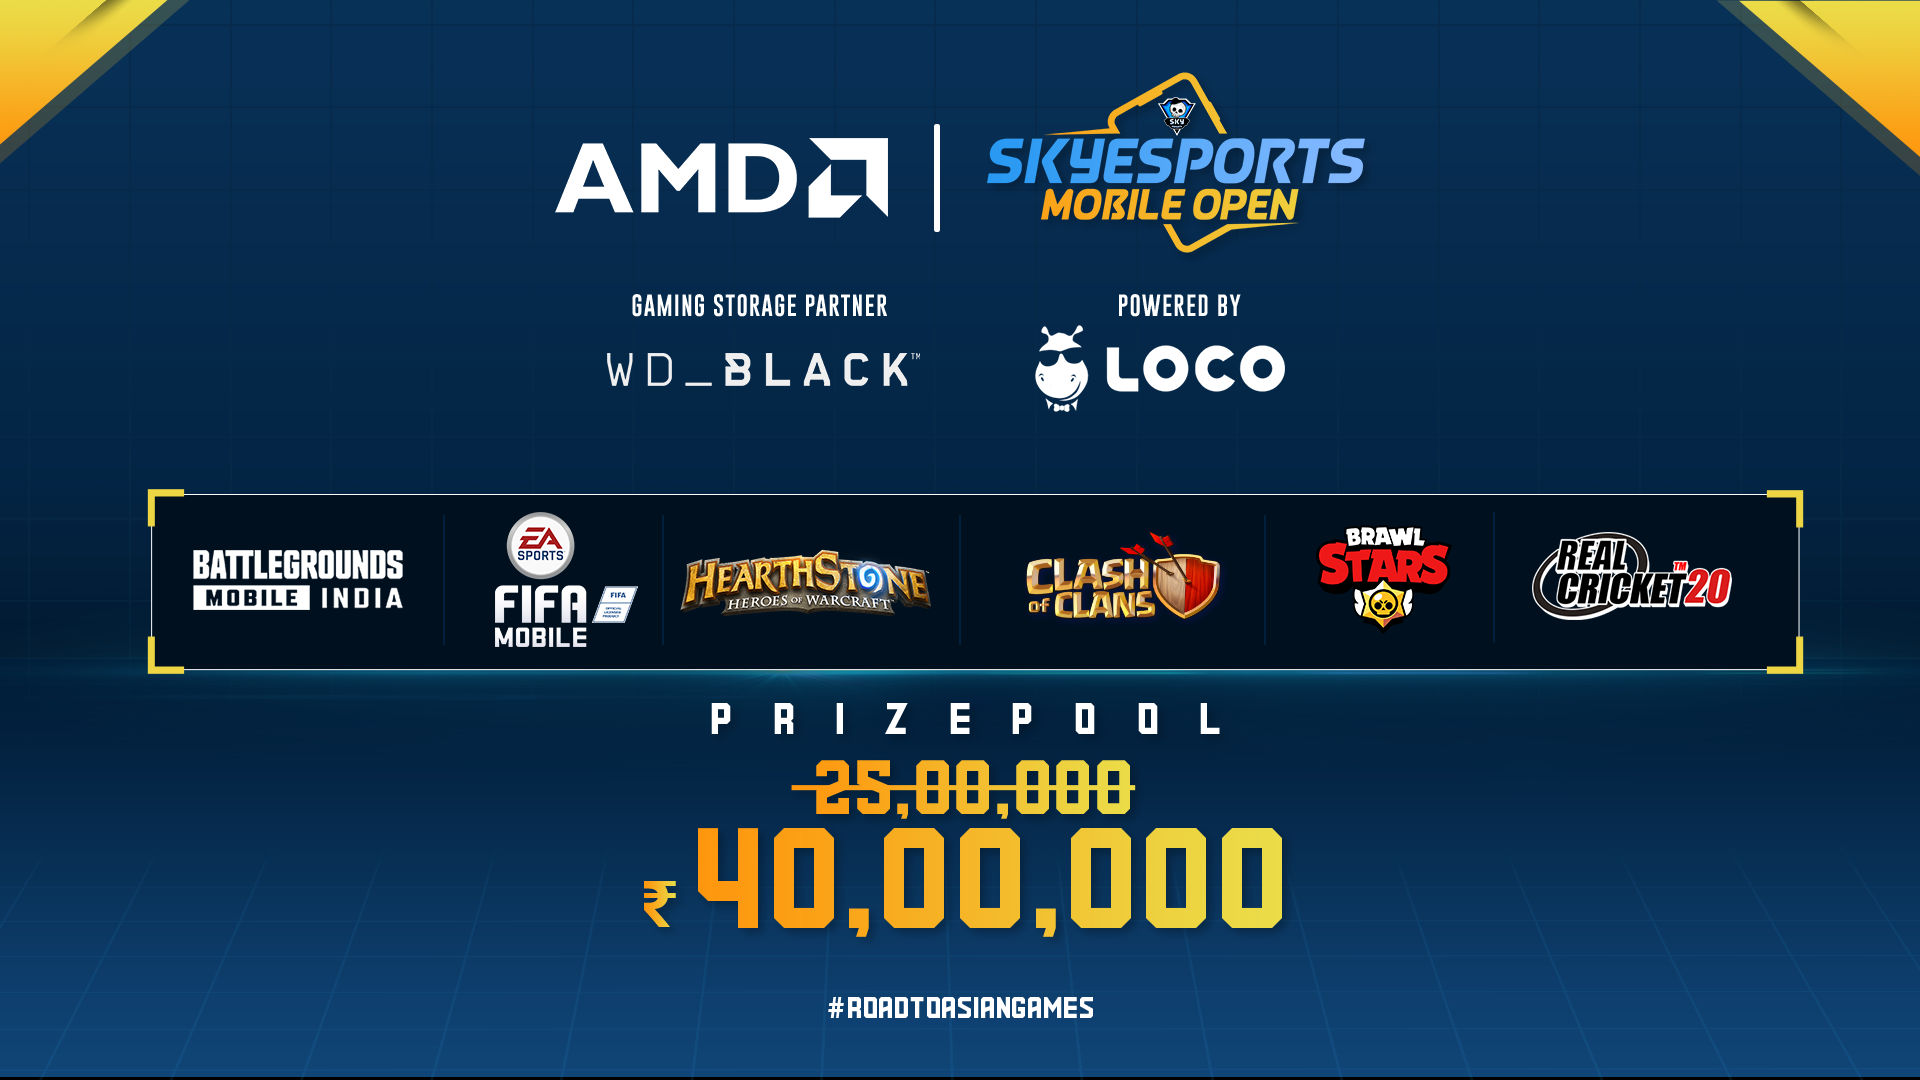 Skyesports Mobile Open